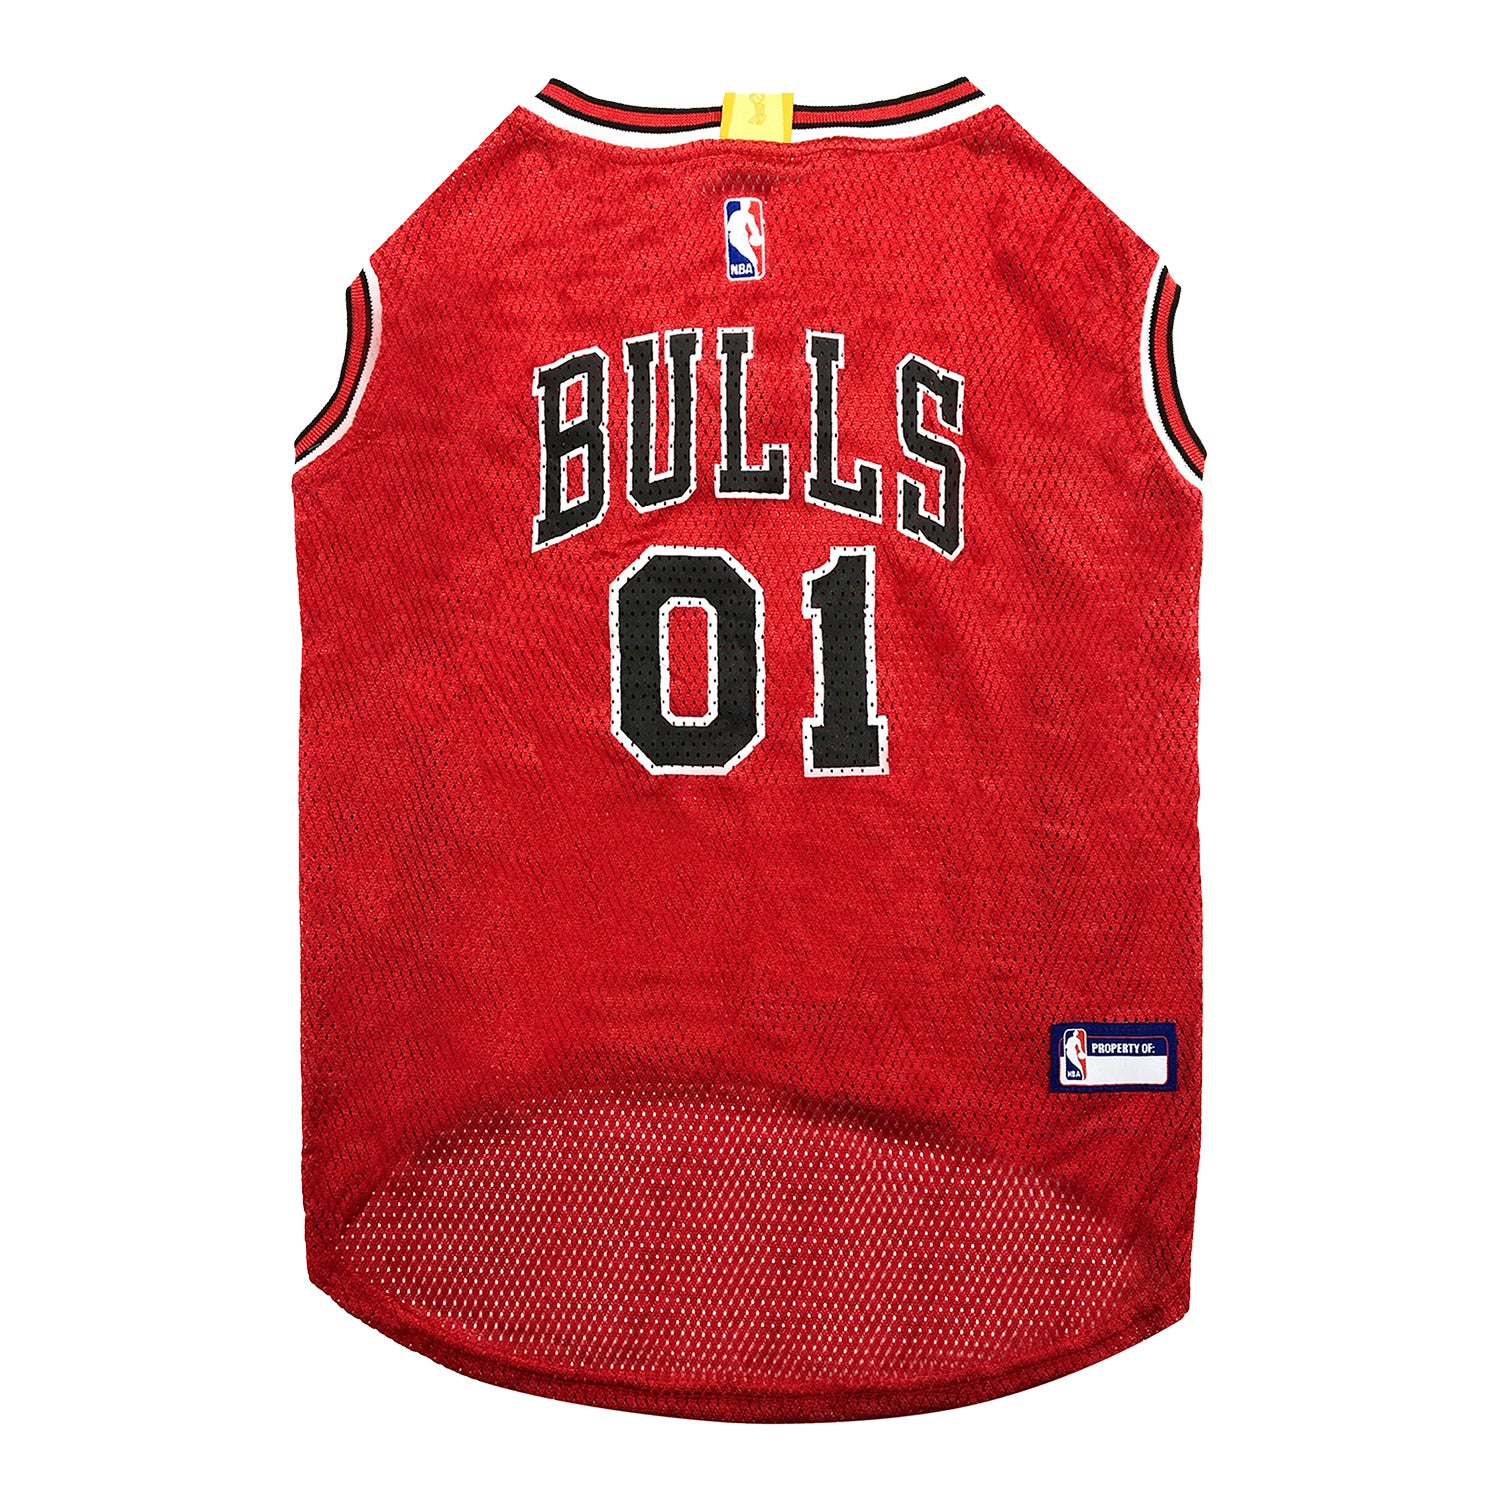 Chicago Bulls Pet Jersey in red - front view